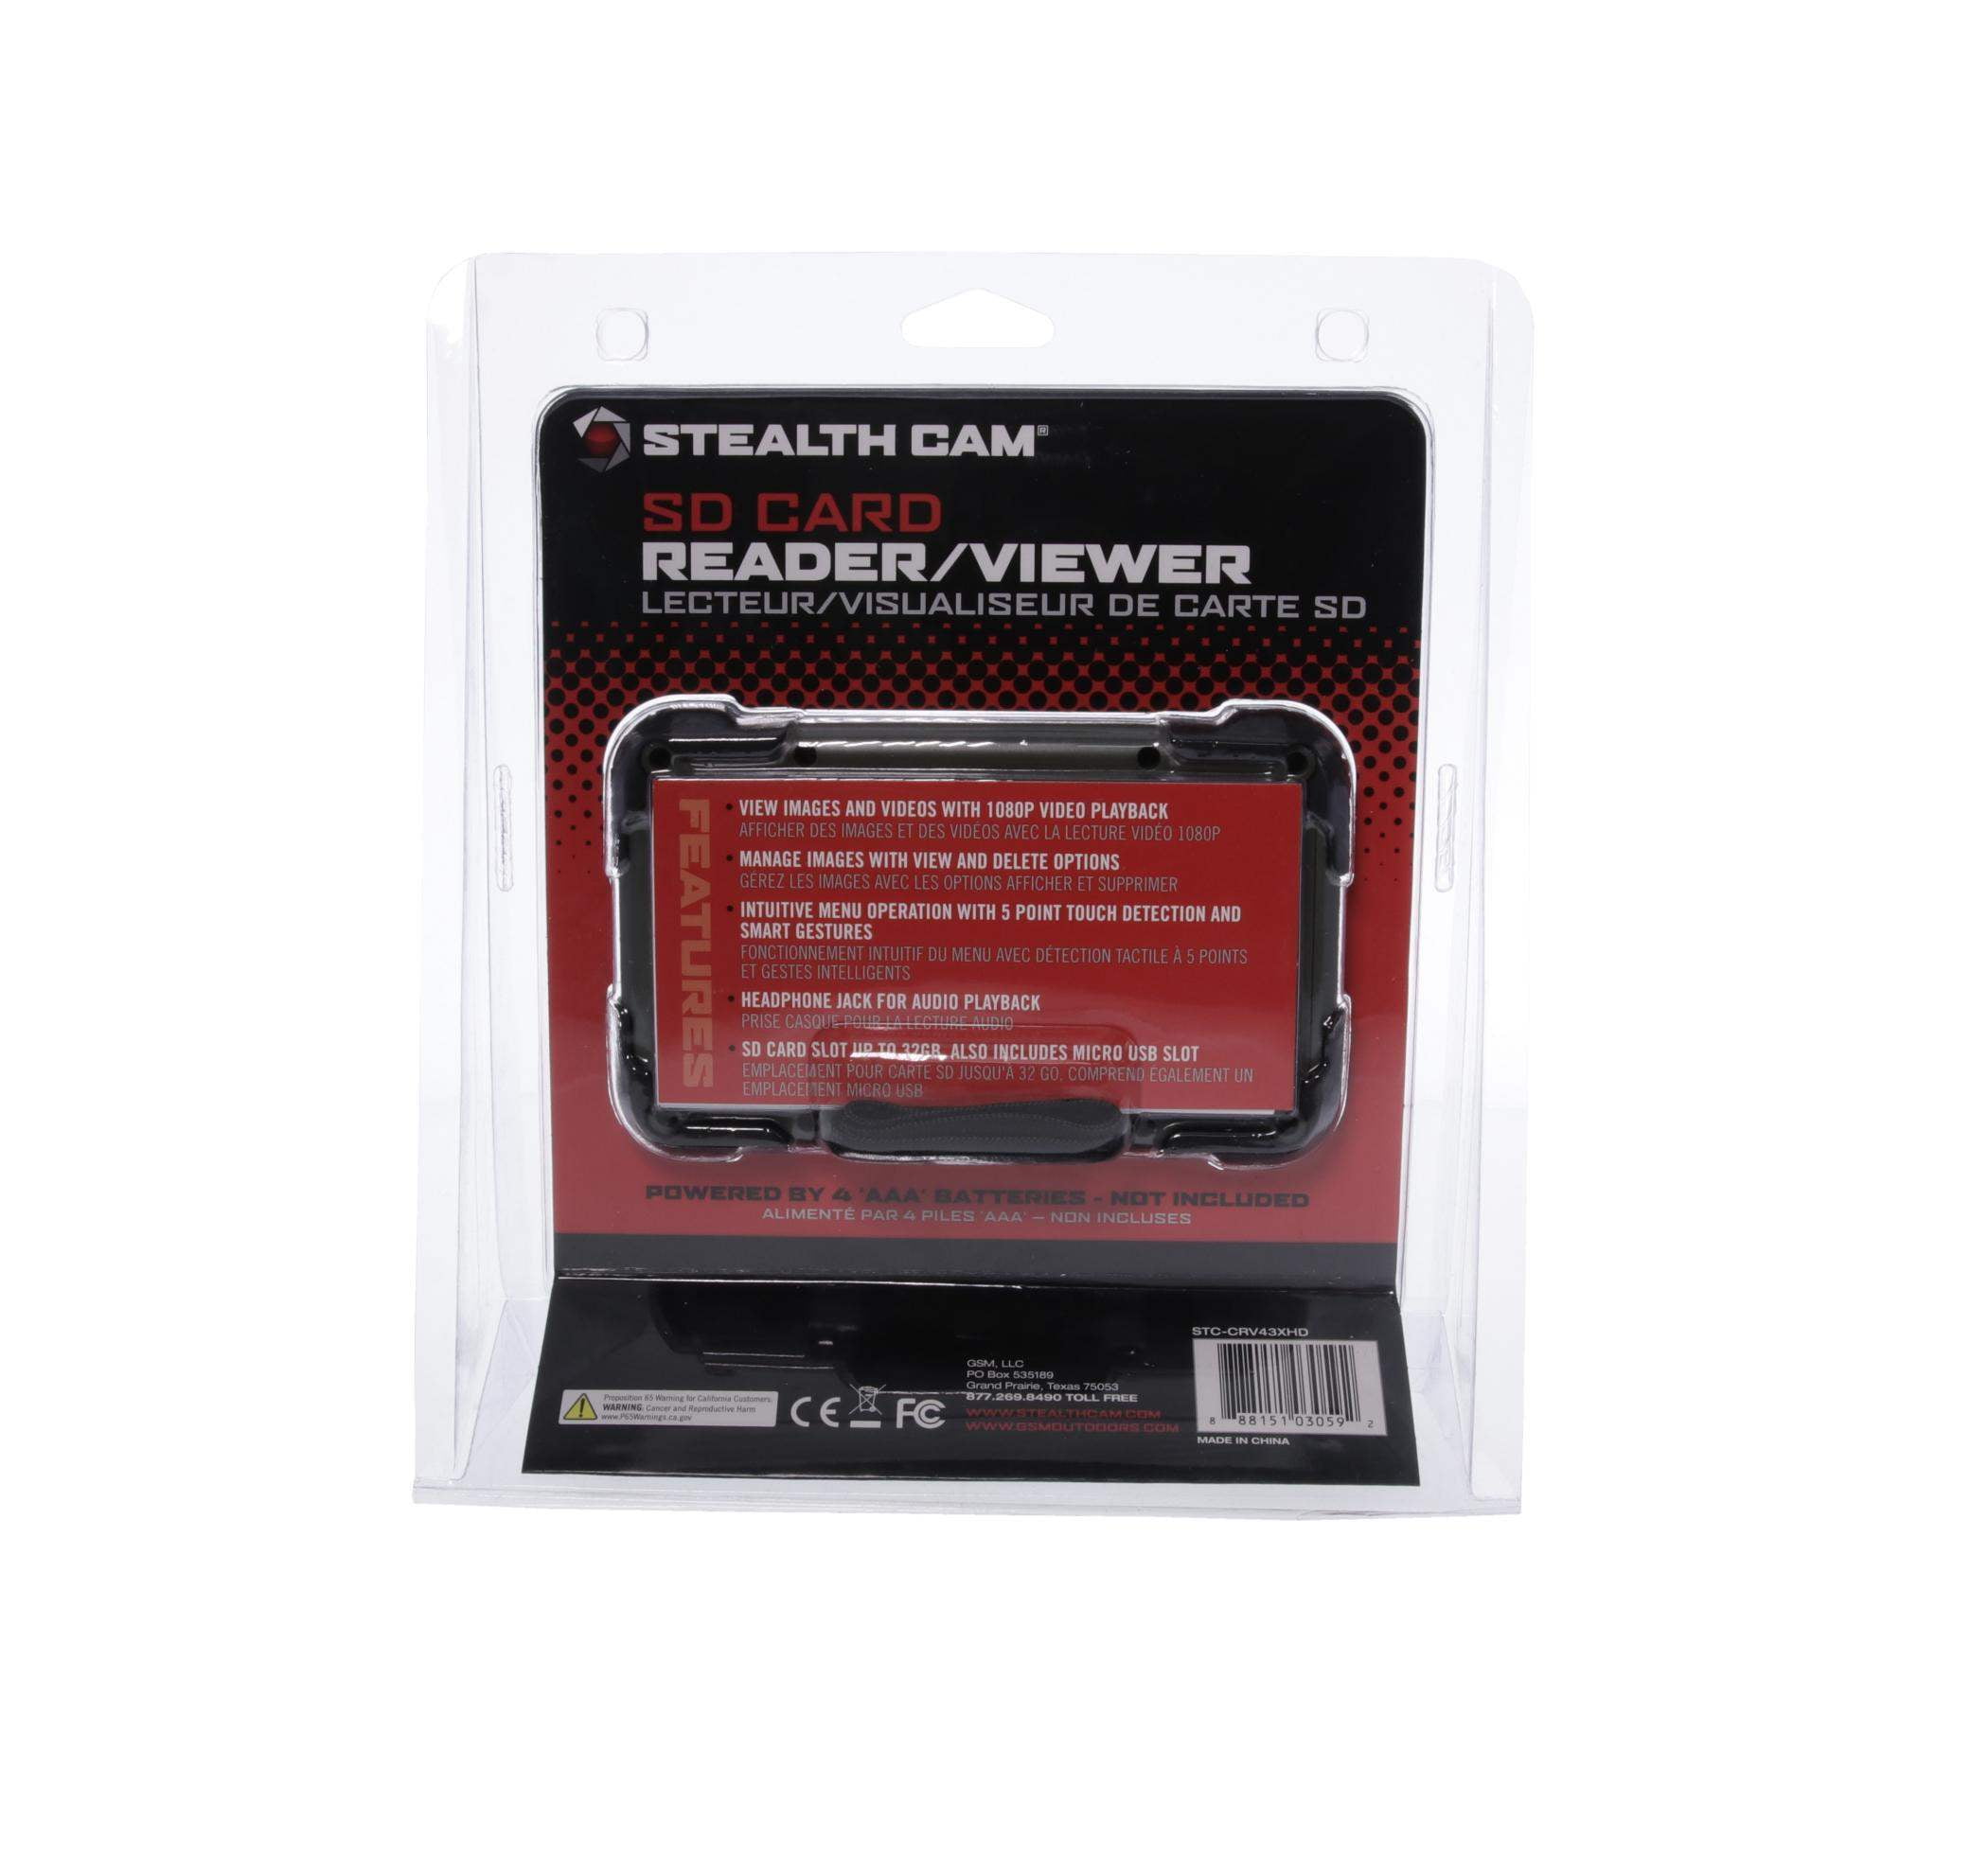 Details about   Stealth Cam 4.3" Color LCD Touch Screen SD Card Reader/Viewer 